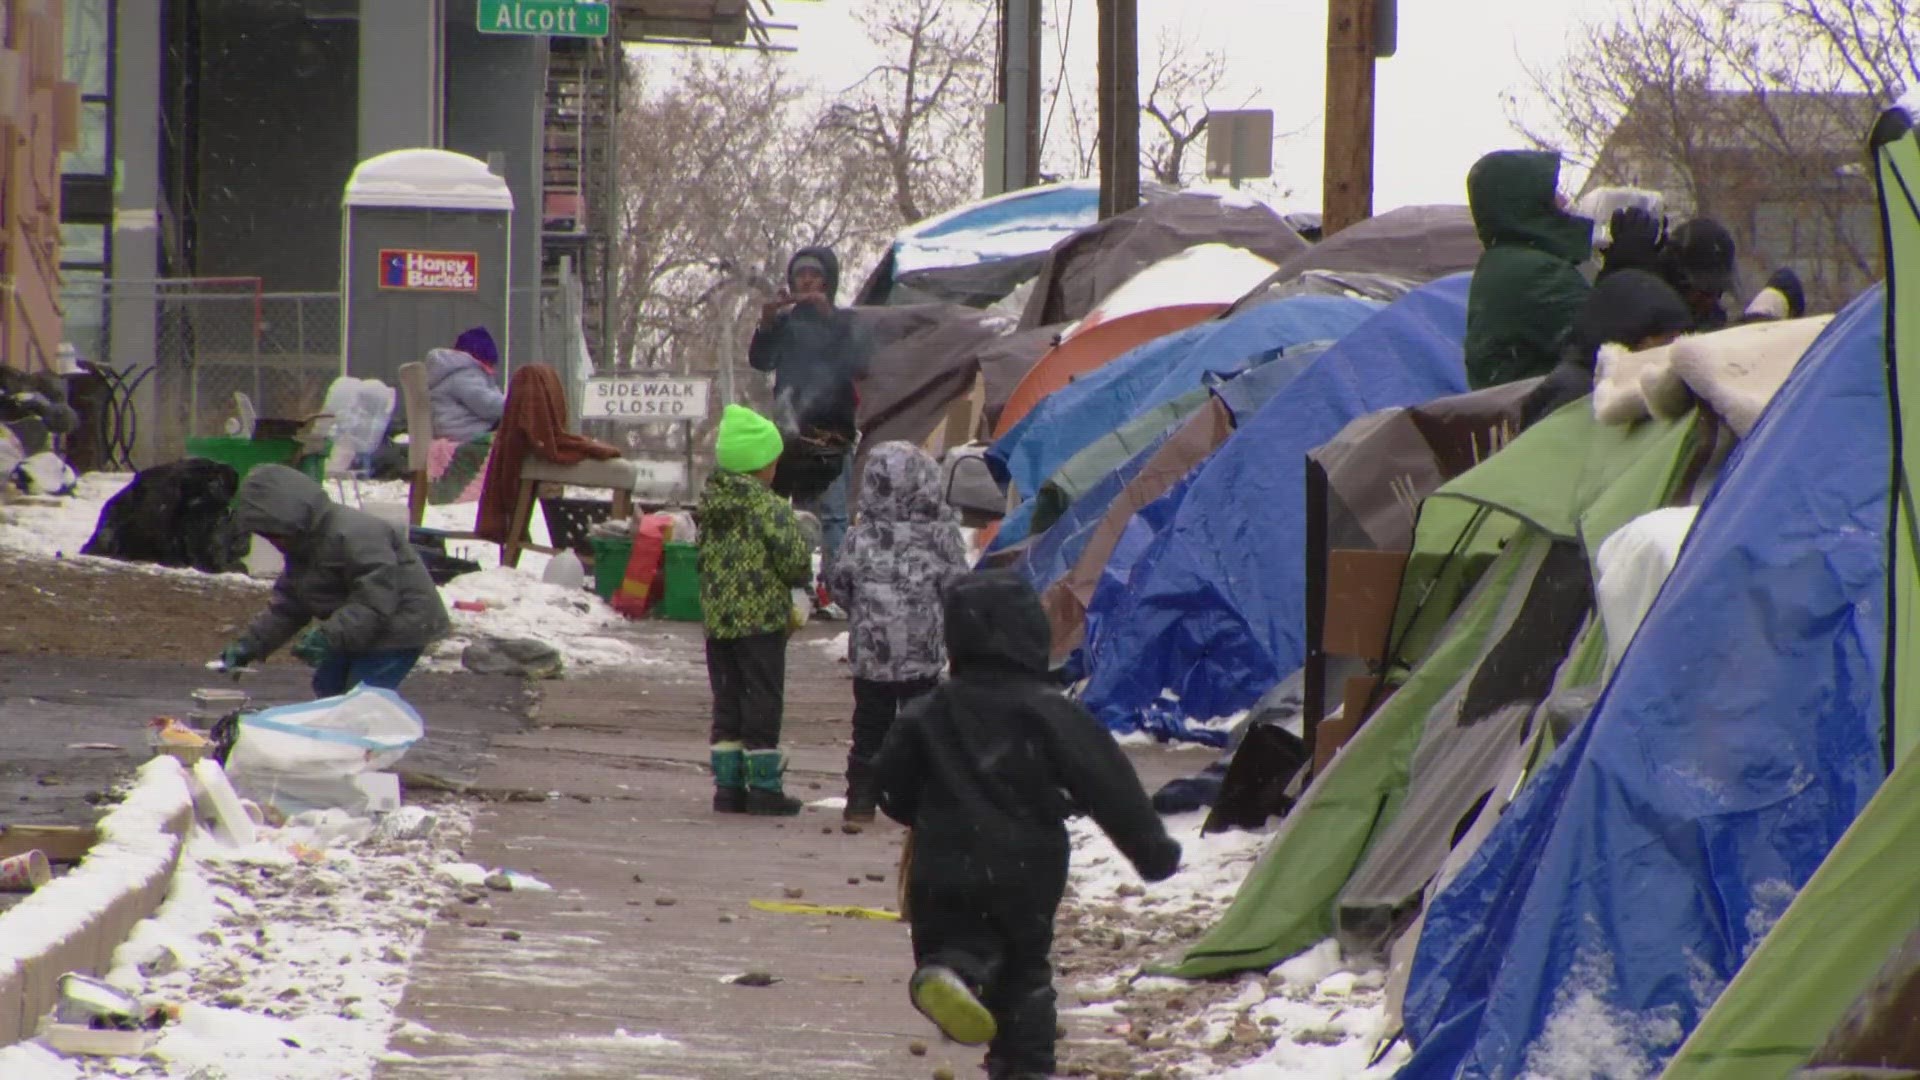 Amy Beck makes sure migrants arriving in Denver have something to eat, and she's also working to help them stay warm.